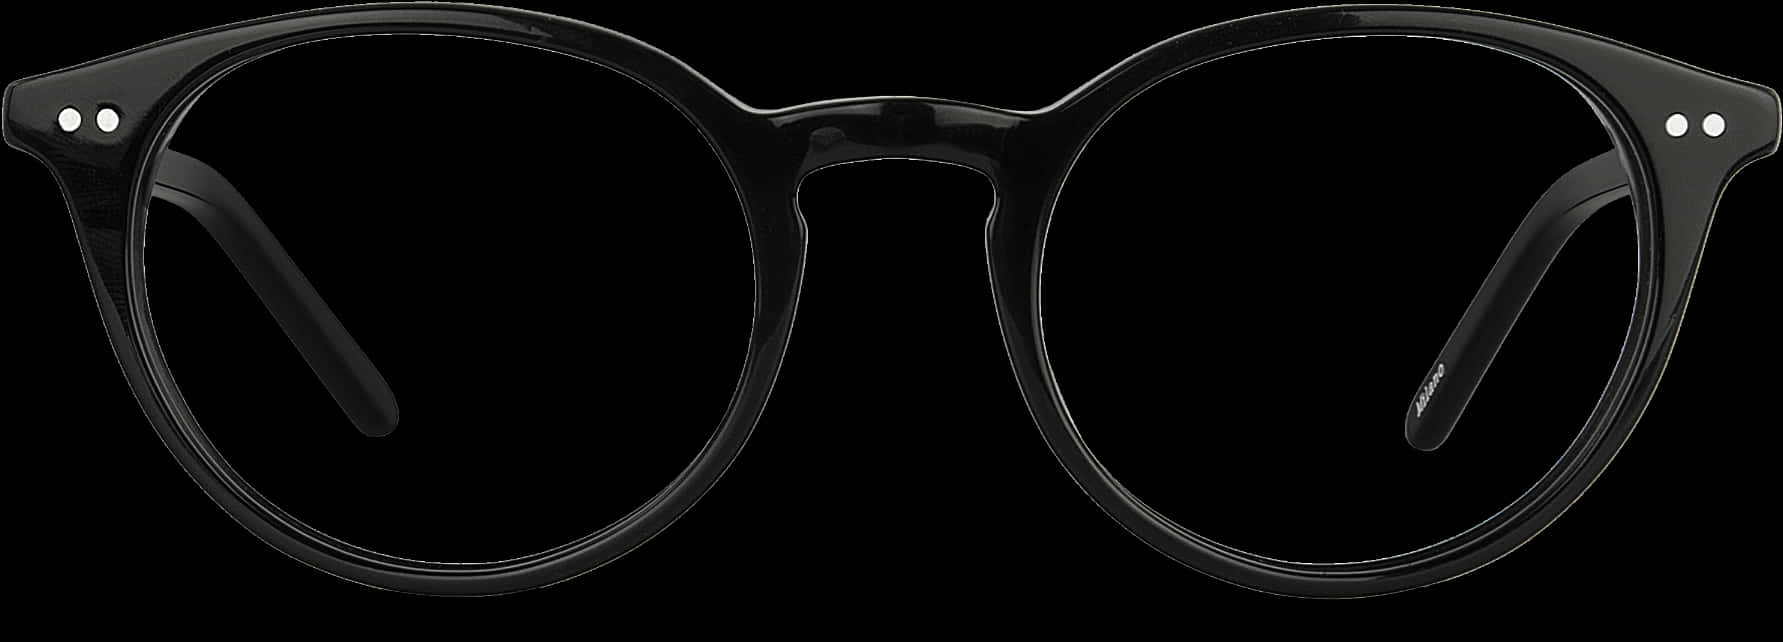 Round Glasses Png